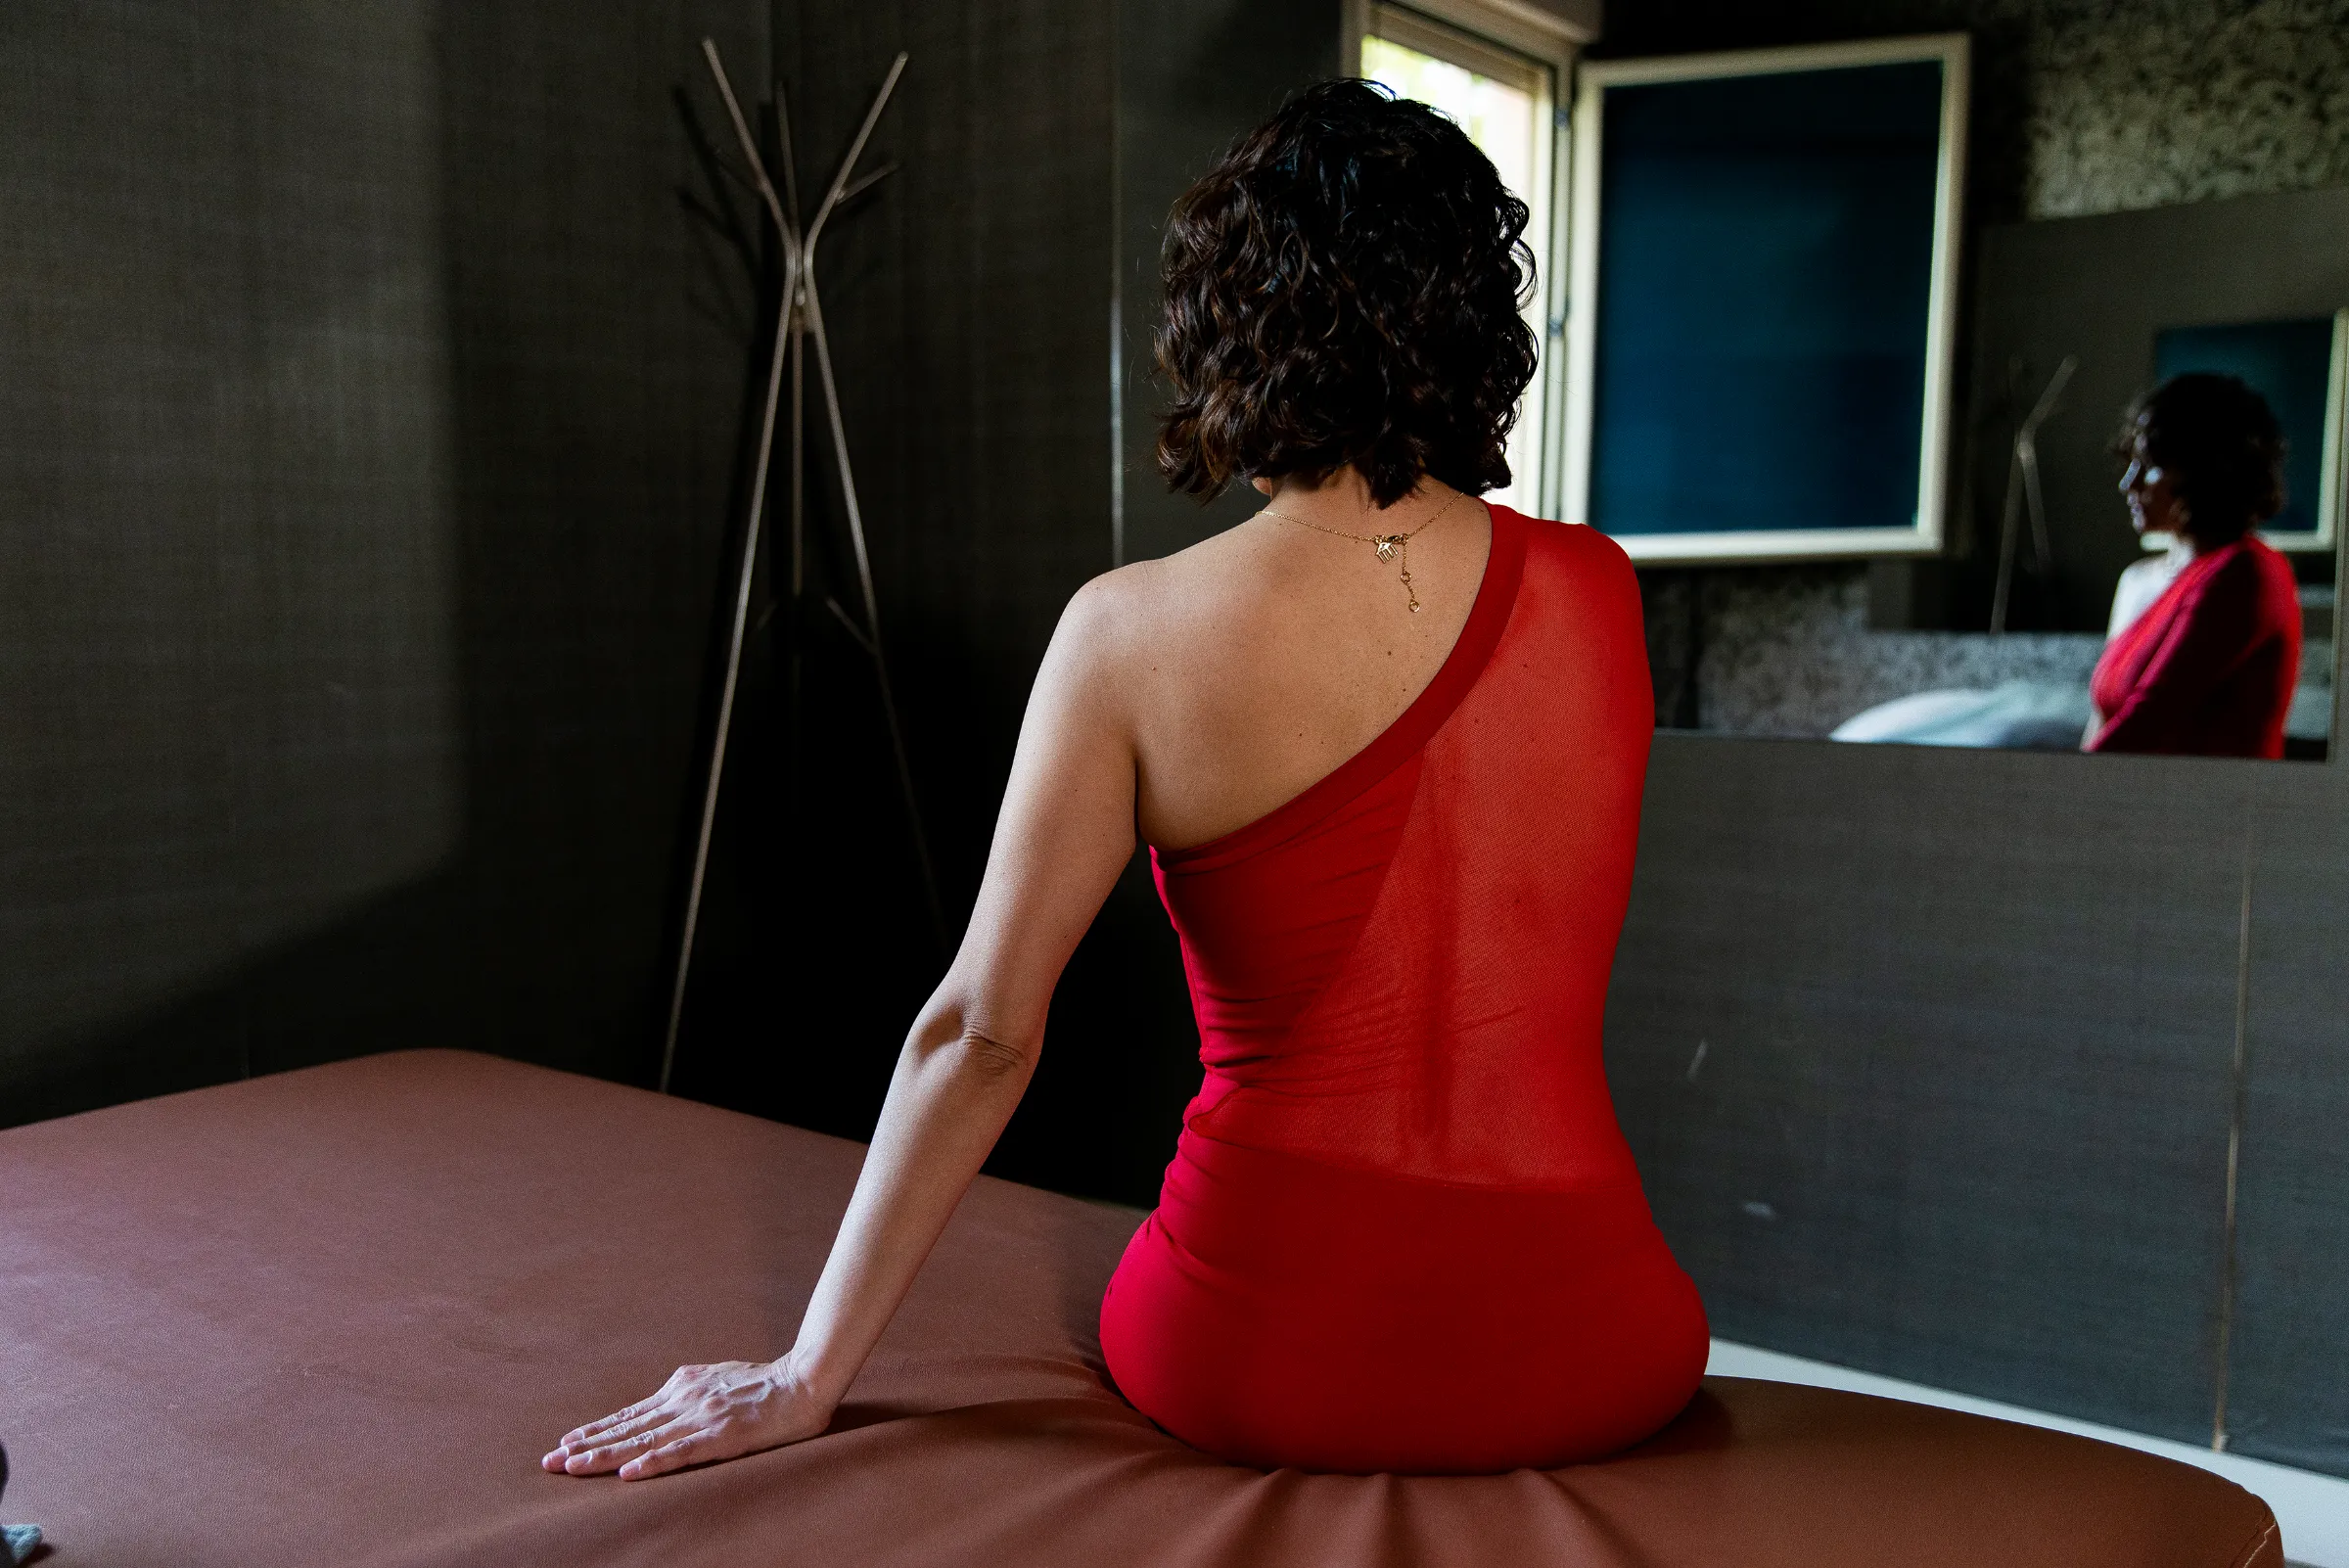 Spanish sex workers fight push to stamp out prostitution